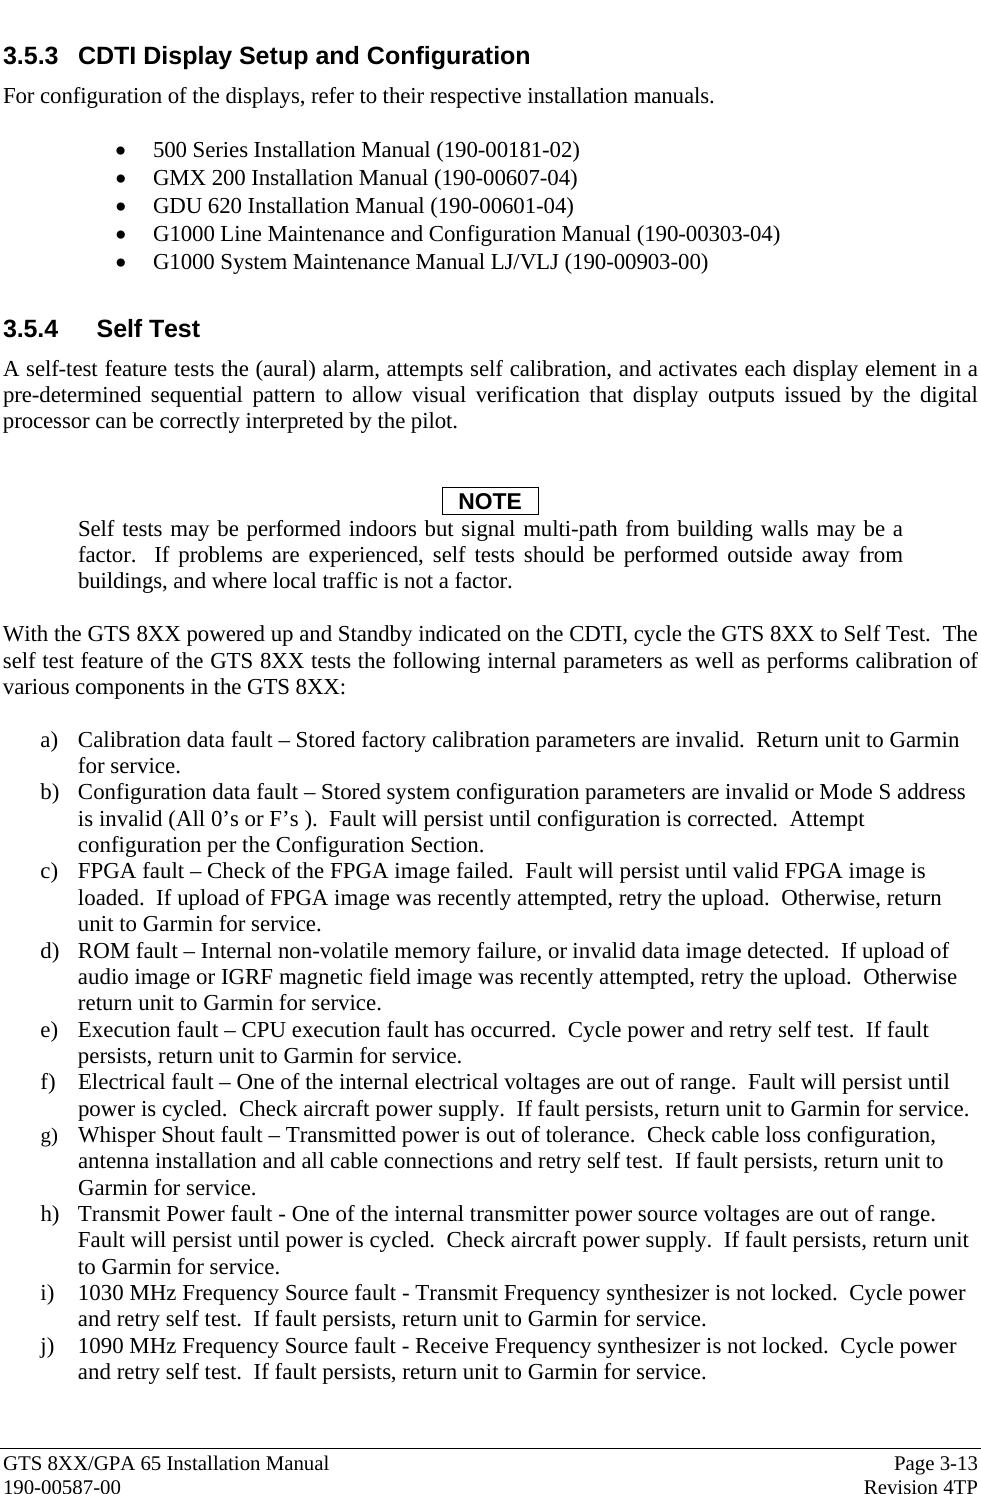  GTS 8XX/GPA 65 Installation Manual  Page 3-13 190-00587-00  Revision 4TP 3.5.3  CDTI Display Setup and Configuration For configuration of the displays, refer to their respective installation manuals.  • 500 Series Installation Manual (190-00181-02) • GMX 200 Installation Manual (190-00607-04) • GDU 620 Installation Manual (190-00601-04) • G1000 Line Maintenance and Configuration Manual (190-00303-04) • G1000 System Maintenance Manual LJ/VLJ (190-00903-00)  3.5.4 Self Test A self-test feature tests the (aural) alarm, attempts self calibration, and activates each display element in a pre-determined sequential pattern to allow visual verification that display outputs issued by the digital processor can be correctly interpreted by the pilot.   NOTE Self tests may be performed indoors but signal multi-path from building walls may be a factor.  If problems are experienced, self tests should be performed outside away from buildings, and where local traffic is not a factor.  With the GTS 8XX powered up and Standby indicated on the CDTI, cycle the GTS 8XX to Self Test.  The self test feature of the GTS 8XX tests the following internal parameters as well as performs calibration of various components in the GTS 8XX:  a) Calibration data fault – Stored factory calibration parameters are invalid.  Return unit to Garmin for service. b) Configuration data fault – Stored system configuration parameters are invalid or Mode S address is invalid (All 0’s or F’s ).  Fault will persist until configuration is corrected.  Attempt configuration per the Configuration Section. c) FPGA fault – Check of the FPGA image failed.  Fault will persist until valid FPGA image is loaded.  If upload of FPGA image was recently attempted, retry the upload.  Otherwise, return unit to Garmin for service.   d) ROM fault – Internal non-volatile memory failure, or invalid data image detected.  If upload of audio image or IGRF magnetic field image was recently attempted, retry the upload.  Otherwise return unit to Garmin for service. e) Execution fault – CPU execution fault has occurred.  Cycle power and retry self test.  If fault persists, return unit to Garmin for service. f) Electrical fault – One of the internal electrical voltages are out of range.  Fault will persist until power is cycled.  Check aircraft power supply.  If fault persists, return unit to Garmin for service. g) Whisper Shout fault – Transmitted power is out of tolerance.  Check cable loss configuration, antenna installation and all cable connections and retry self test.  If fault persists, return unit to Garmin for service. h) Transmit Power fault - One of the internal transmitter power source voltages are out of range.  Fault will persist until power is cycled.  Check aircraft power supply.  If fault persists, return unit to Garmin for service. i) 1030 MHz Frequency Source fault - Transmit Frequency synthesizer is not locked.  Cycle power and retry self test.  If fault persists, return unit to Garmin for service. j) 1090 MHz Frequency Source fault - Receive Frequency synthesizer is not locked.  Cycle power and retry self test.  If fault persists, return unit to Garmin for service. 